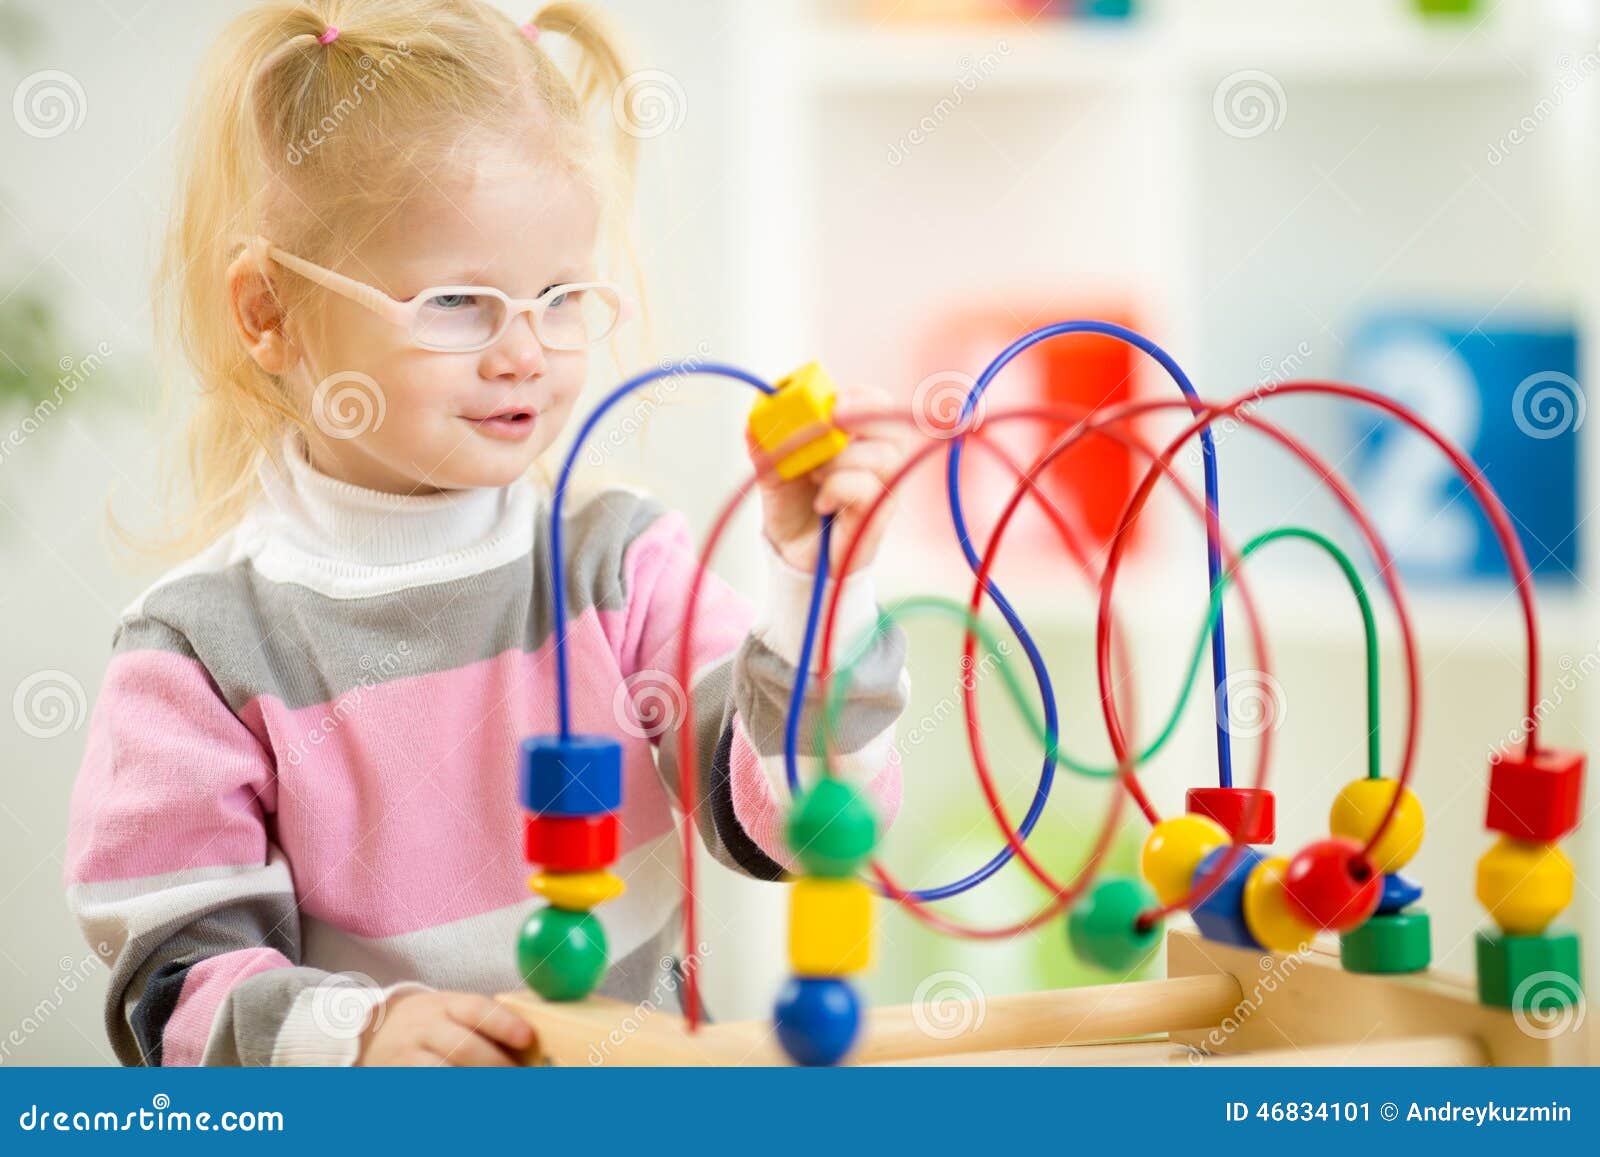 kid in eyeglases playing colorful toy in home